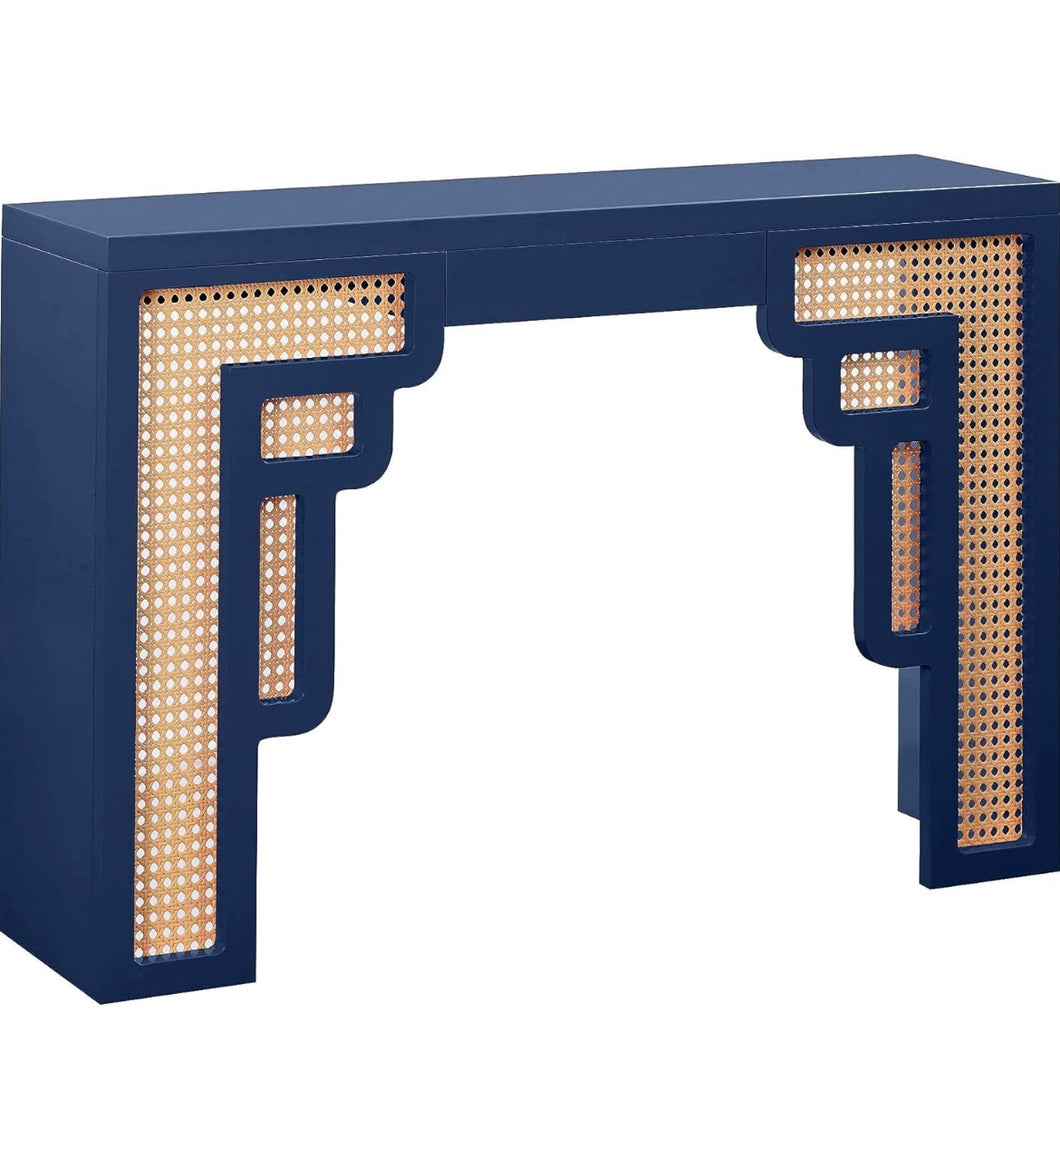 The Cane Console in Navy